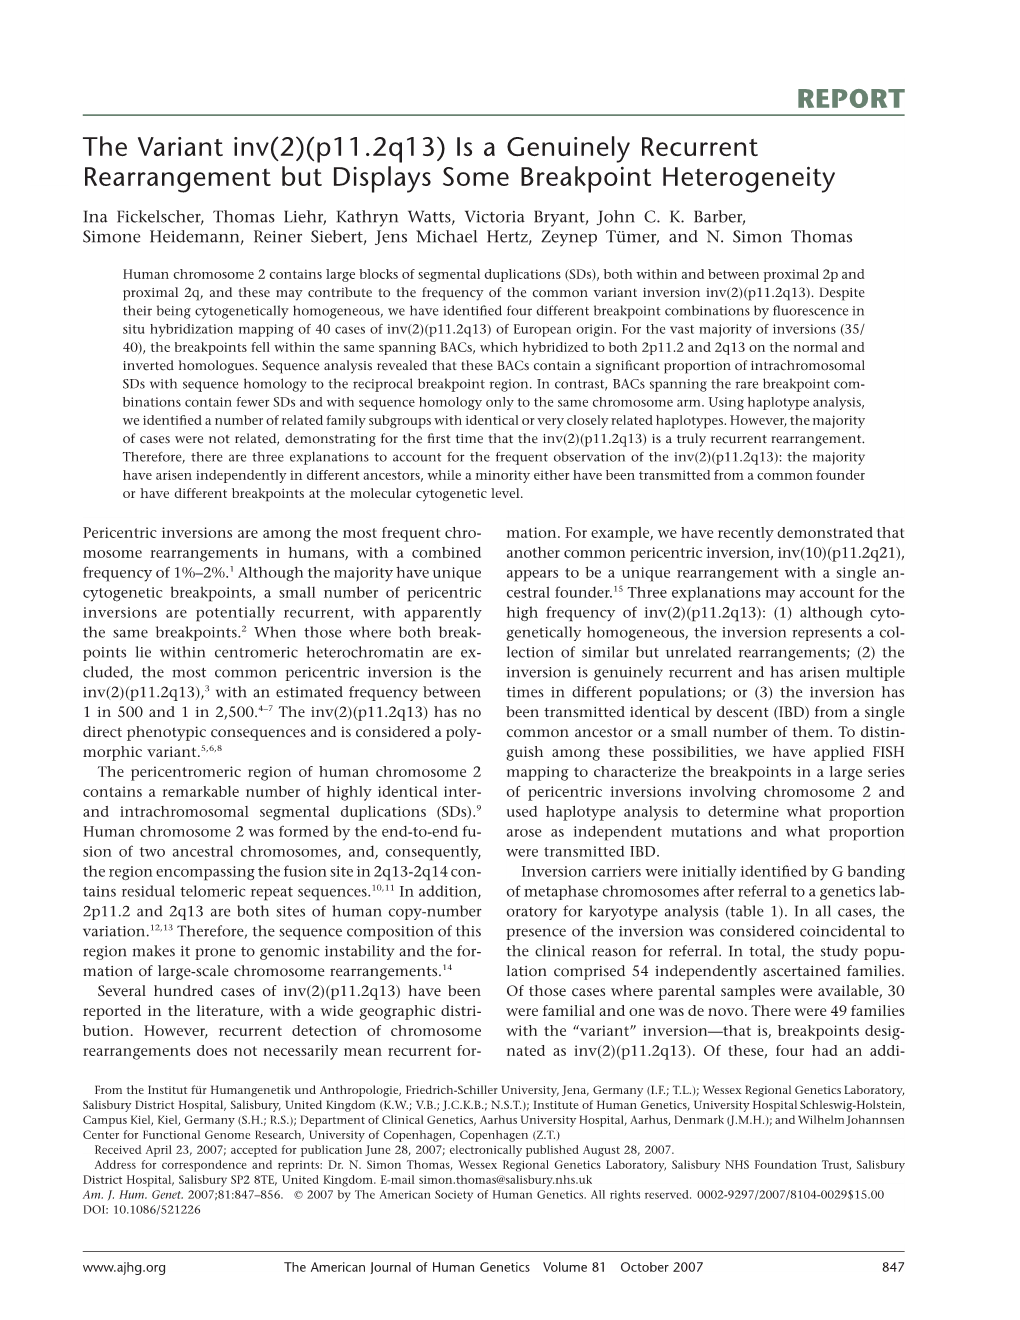 REPORT the Variant Inv(2)(P11.2Q13) Is a Genuinely Recurrent Rearrangement but Displays Some Breakpoint Heterogeneity